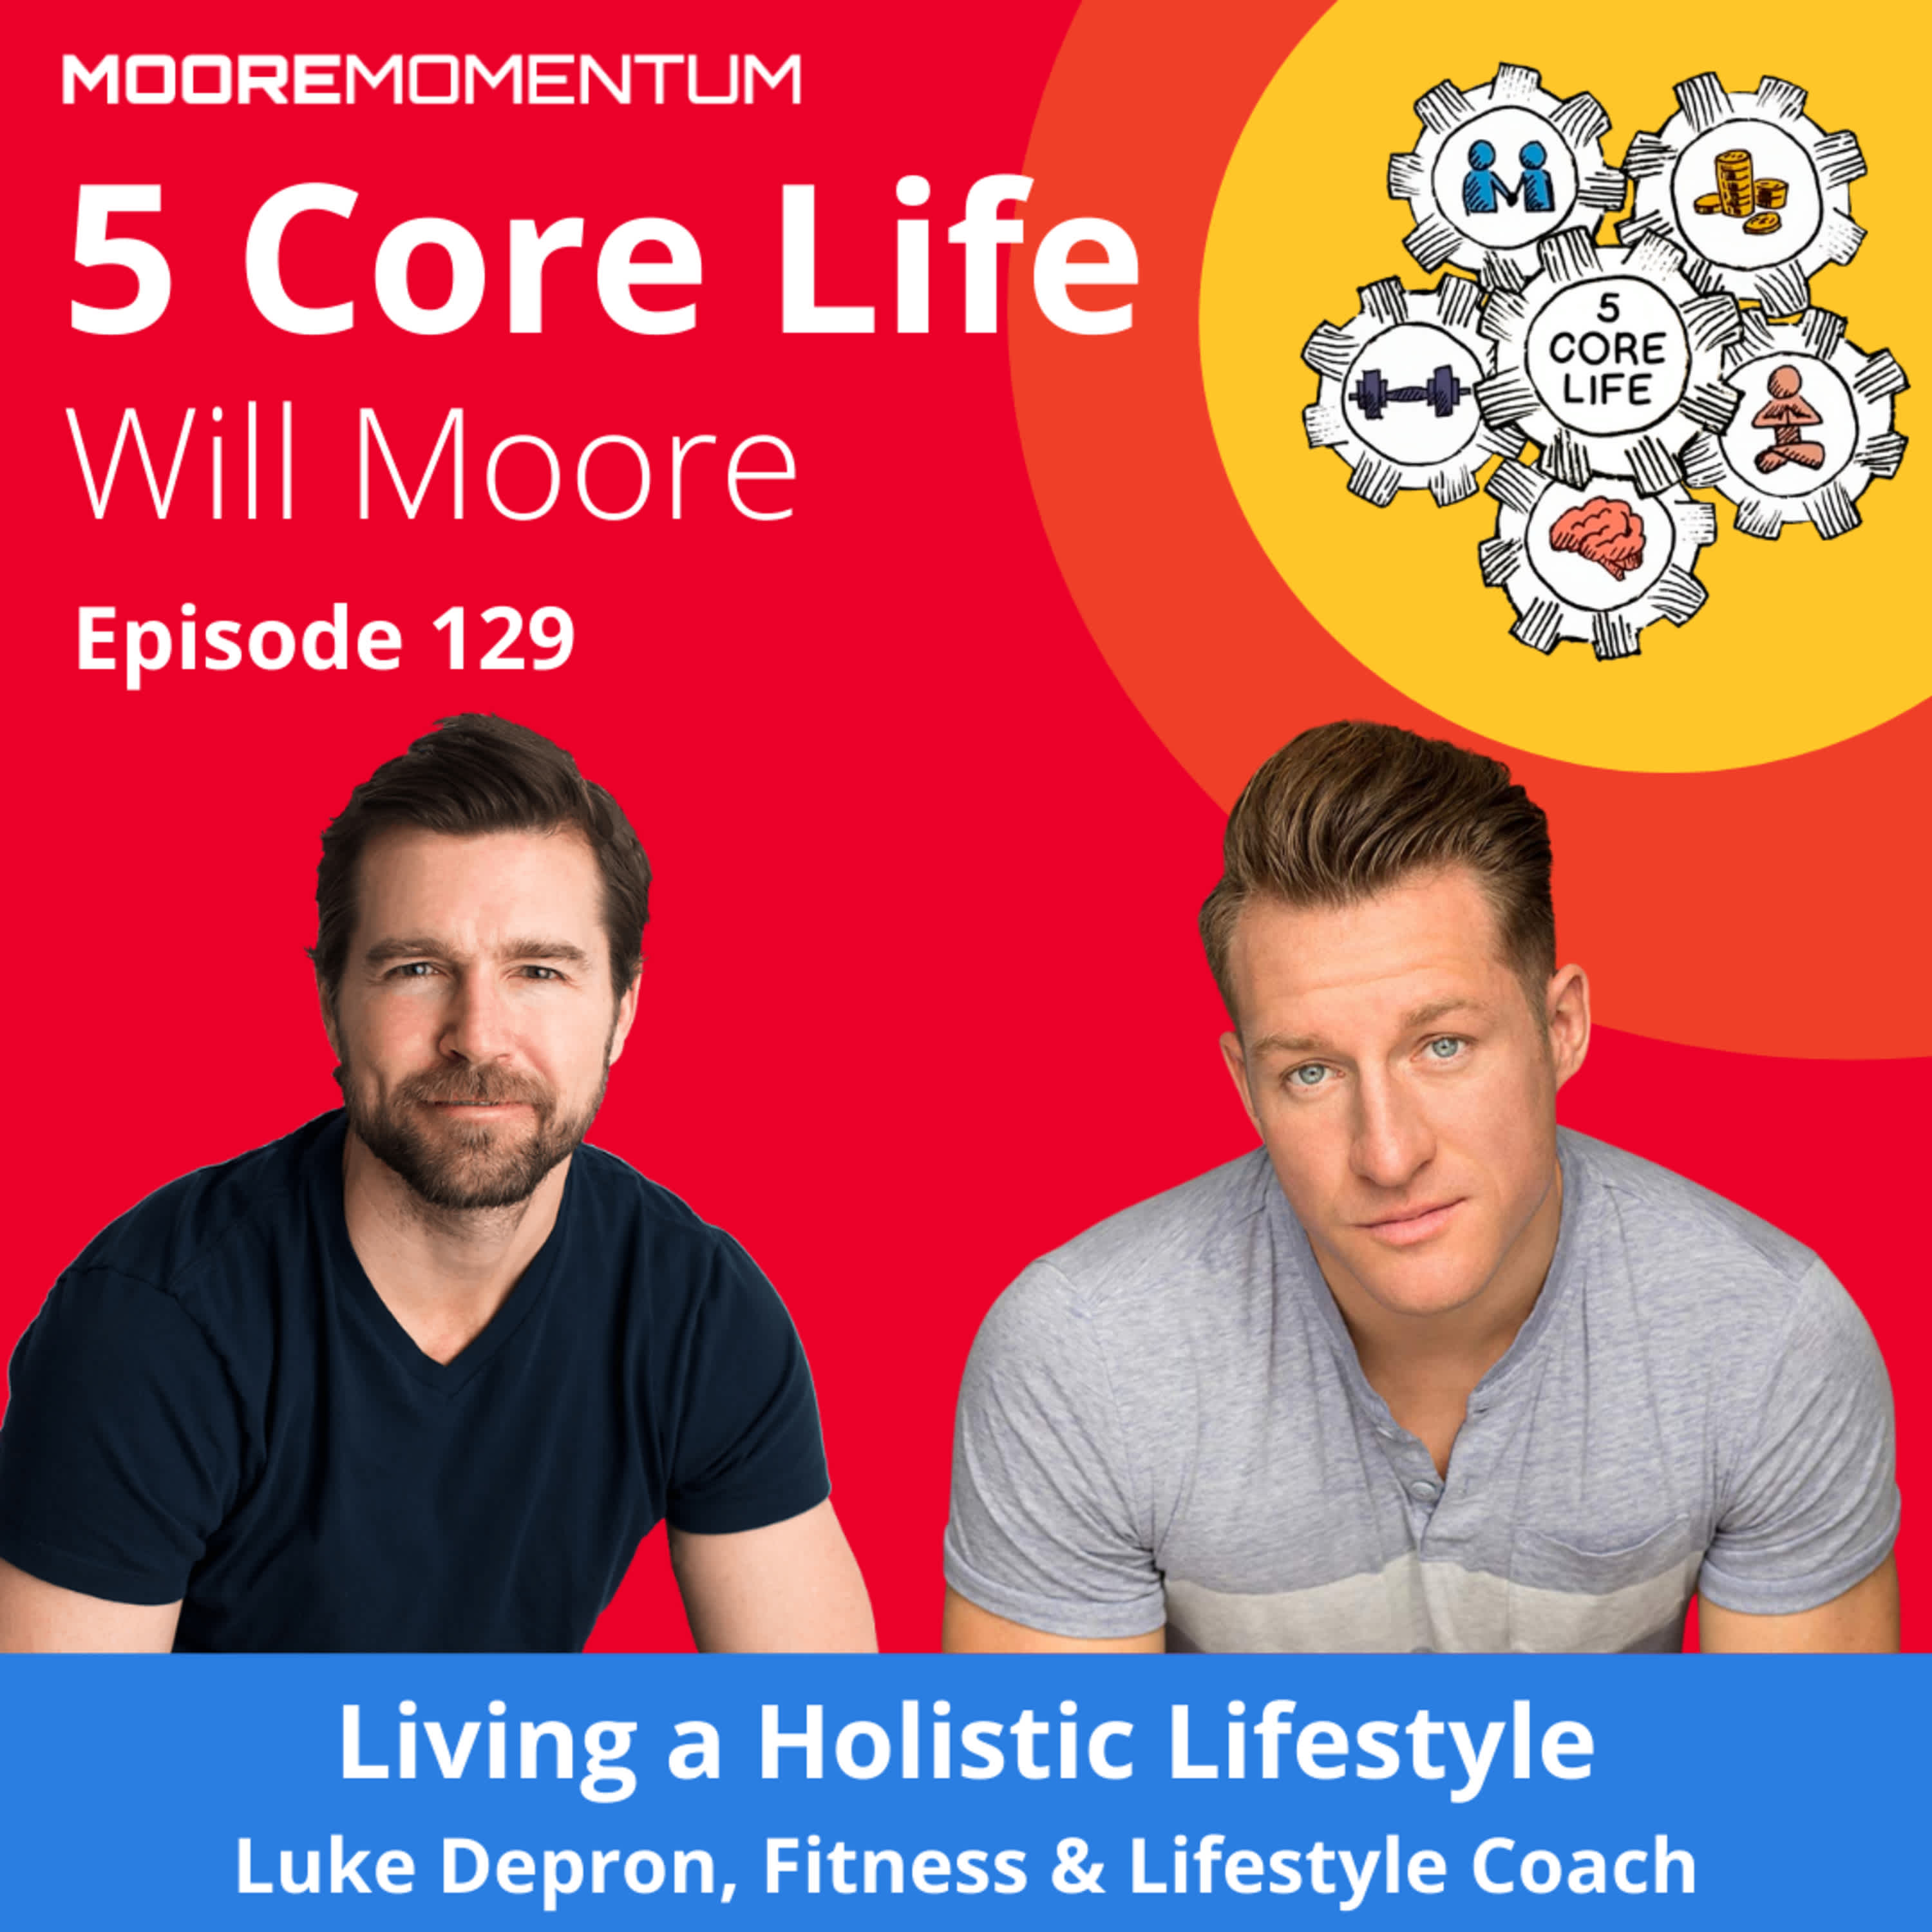 Living a Holistic Lifestyle, Lose Weight, Live Great | Luke Depron, Fitness & Lifestyle Coach